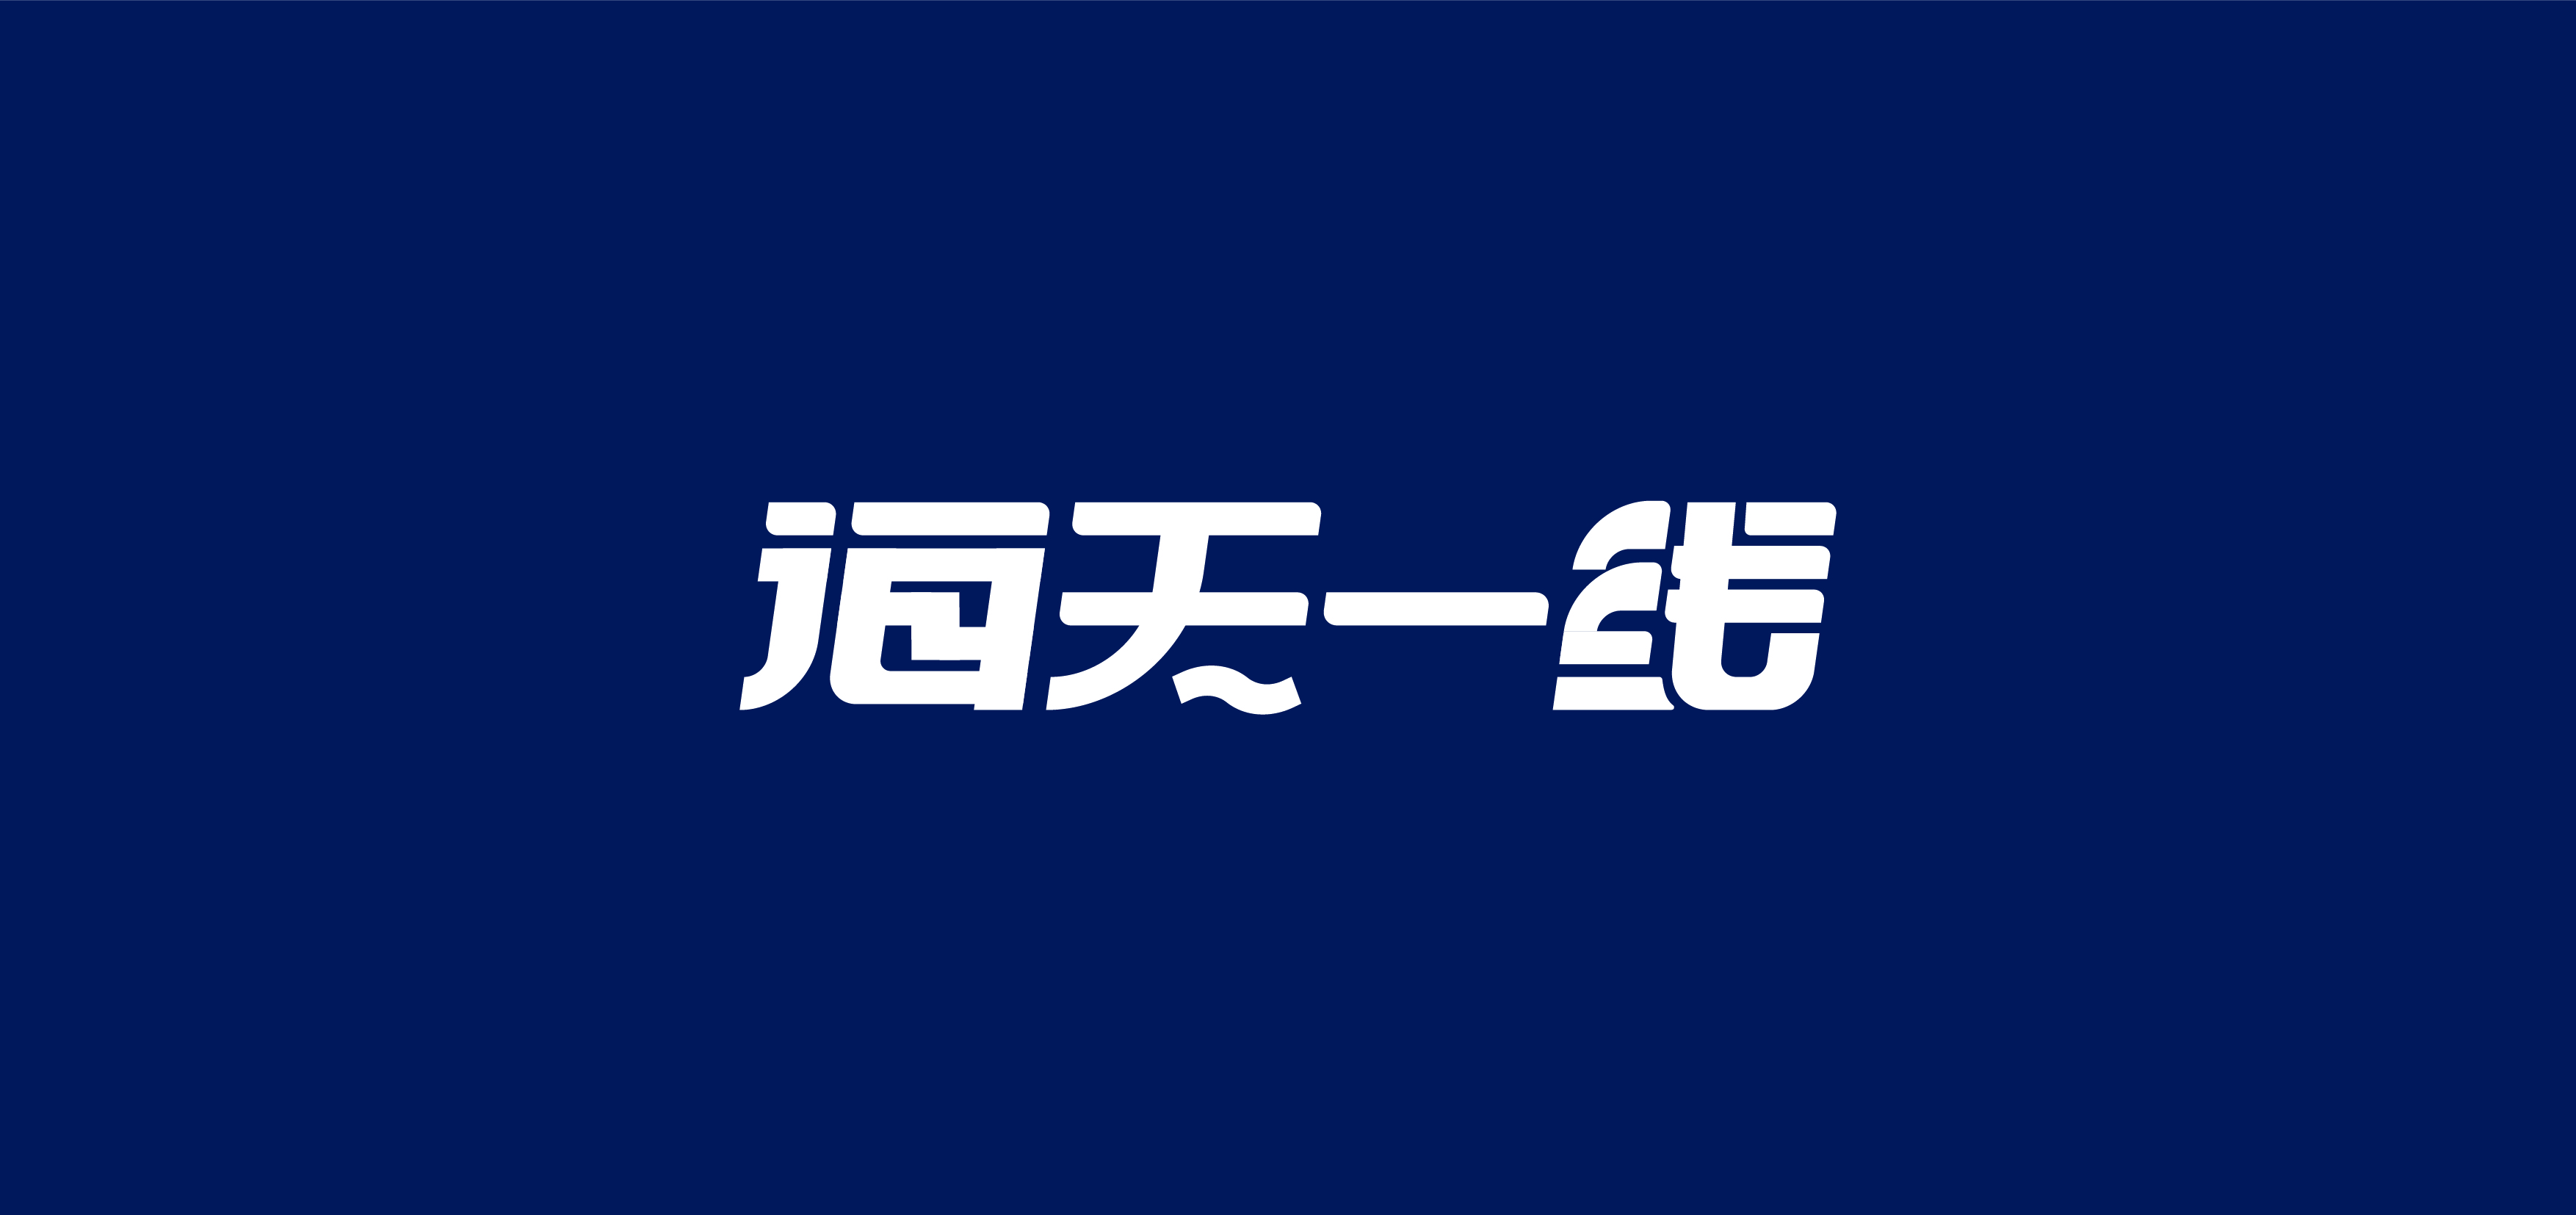 17P Collection of the latest Chinese font design schemes in 2021 #.505